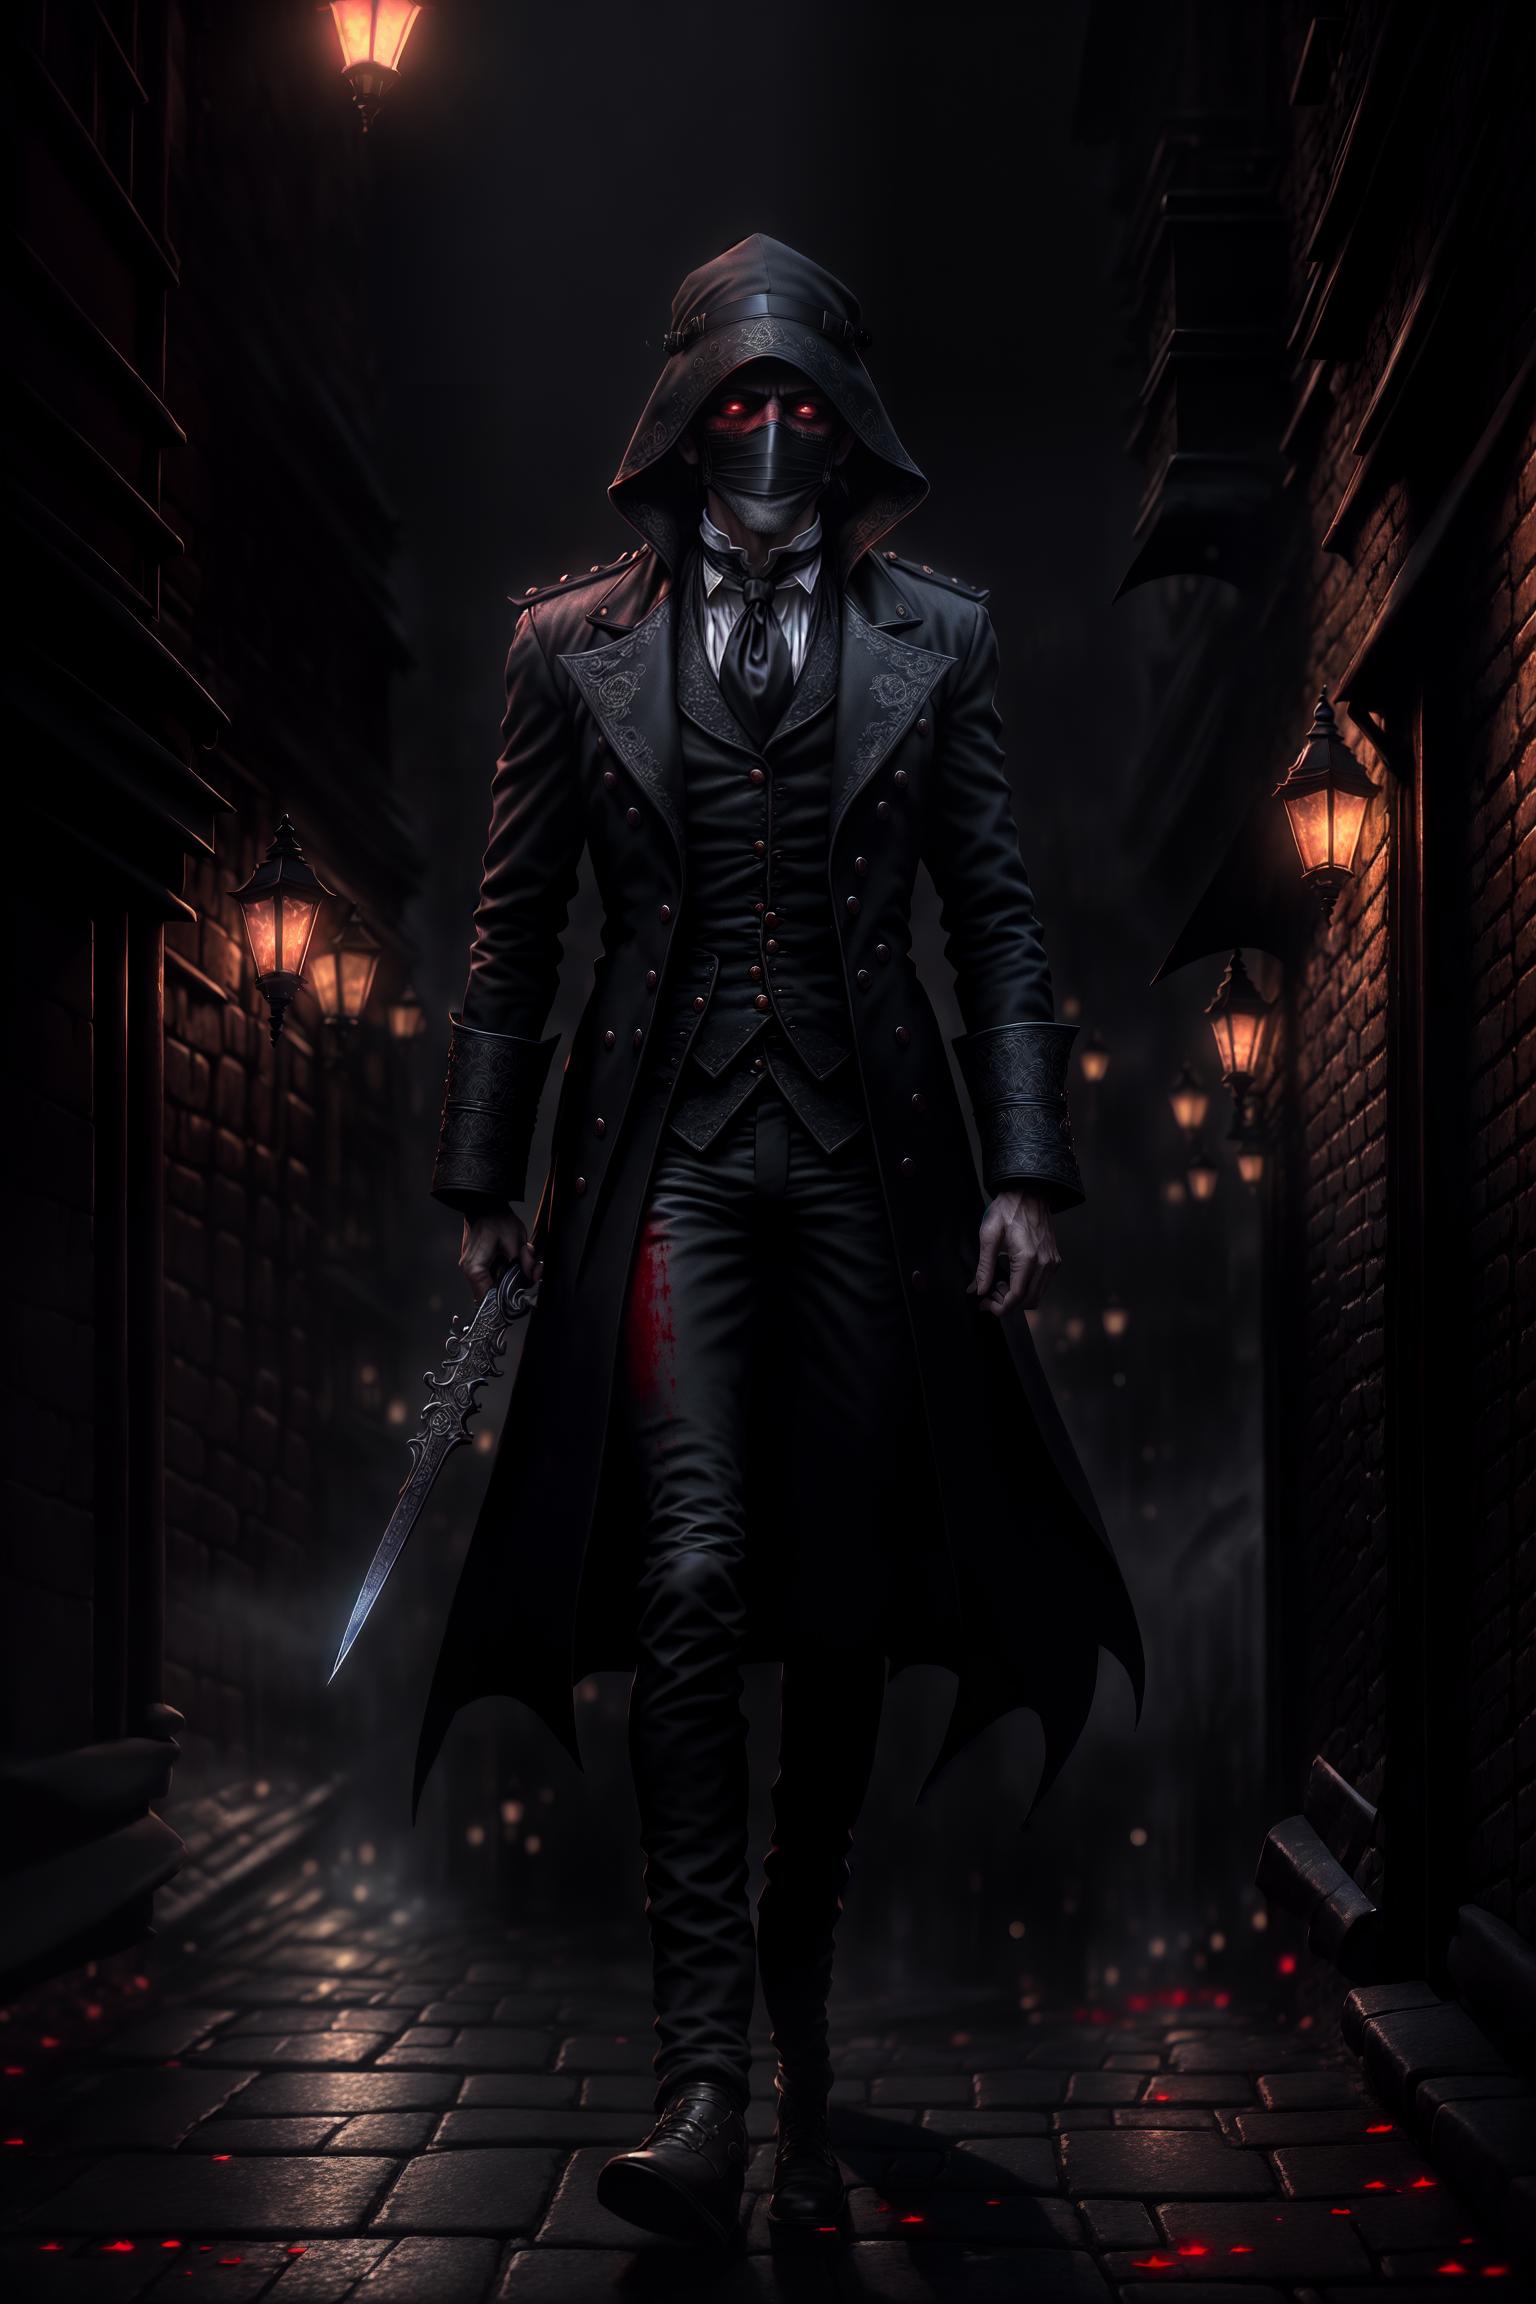  Jack the Ripper, (male:1.5),(skinny and shriveled), (wearing a terror mask:1.2), (long coat:1.0), (wearing a black dark colored long coat), (making him harder to detect at night), (knife in hand:1.1), (eerie gait:1.0), (street environment:1.2), (fog covered streets of the old city of London in the late 19th century), (environment includes ancient buildings, cobblestone roads, and dim twilight lights), (night and fog:1.0), (a night with the moon high, few stars, and thick fog), (increasing the sense of mystery and horror), (deserted:0.8), (to add to the mystery and horror), (depicting a deserted street), (only a few dim and unclear lights around), (bloodstain element:1.2), (adding some bright red bloodstains near the character or on the tool hyperrealistic, full body, detailed clothing, highly detailed, cinematic lighting, stunningly beautiful, intricate, sharp focus, f/1. 8, 85mm, (centered image composition), (professionally color graded), ((bright soft diffused light)), volumetric fog, trending on instagram, trending on tumblr, HDR 4K, 8K